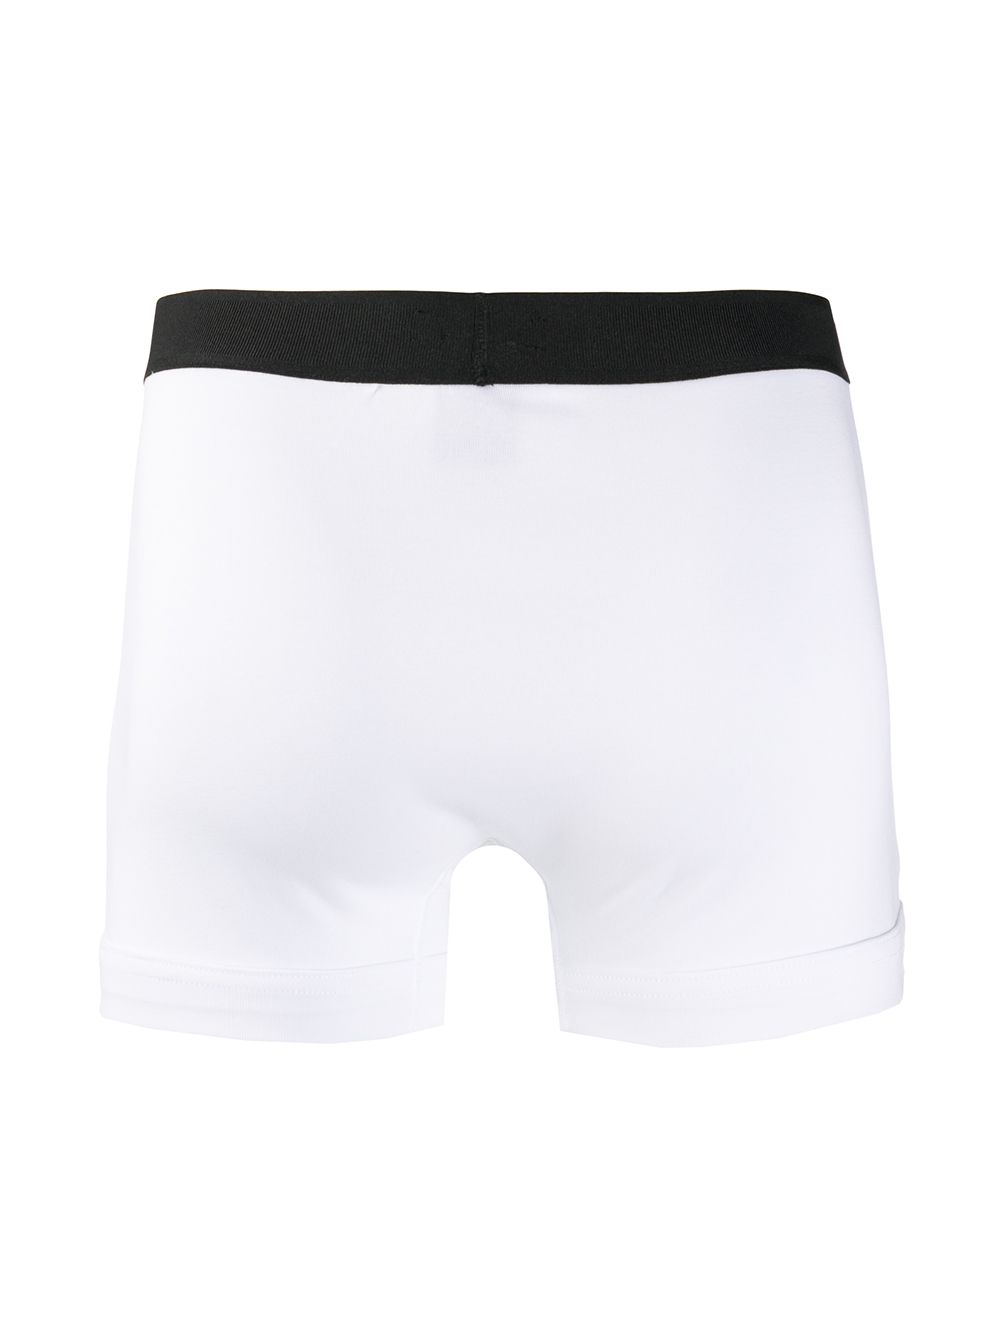 TOM FORD COTTON BOXER